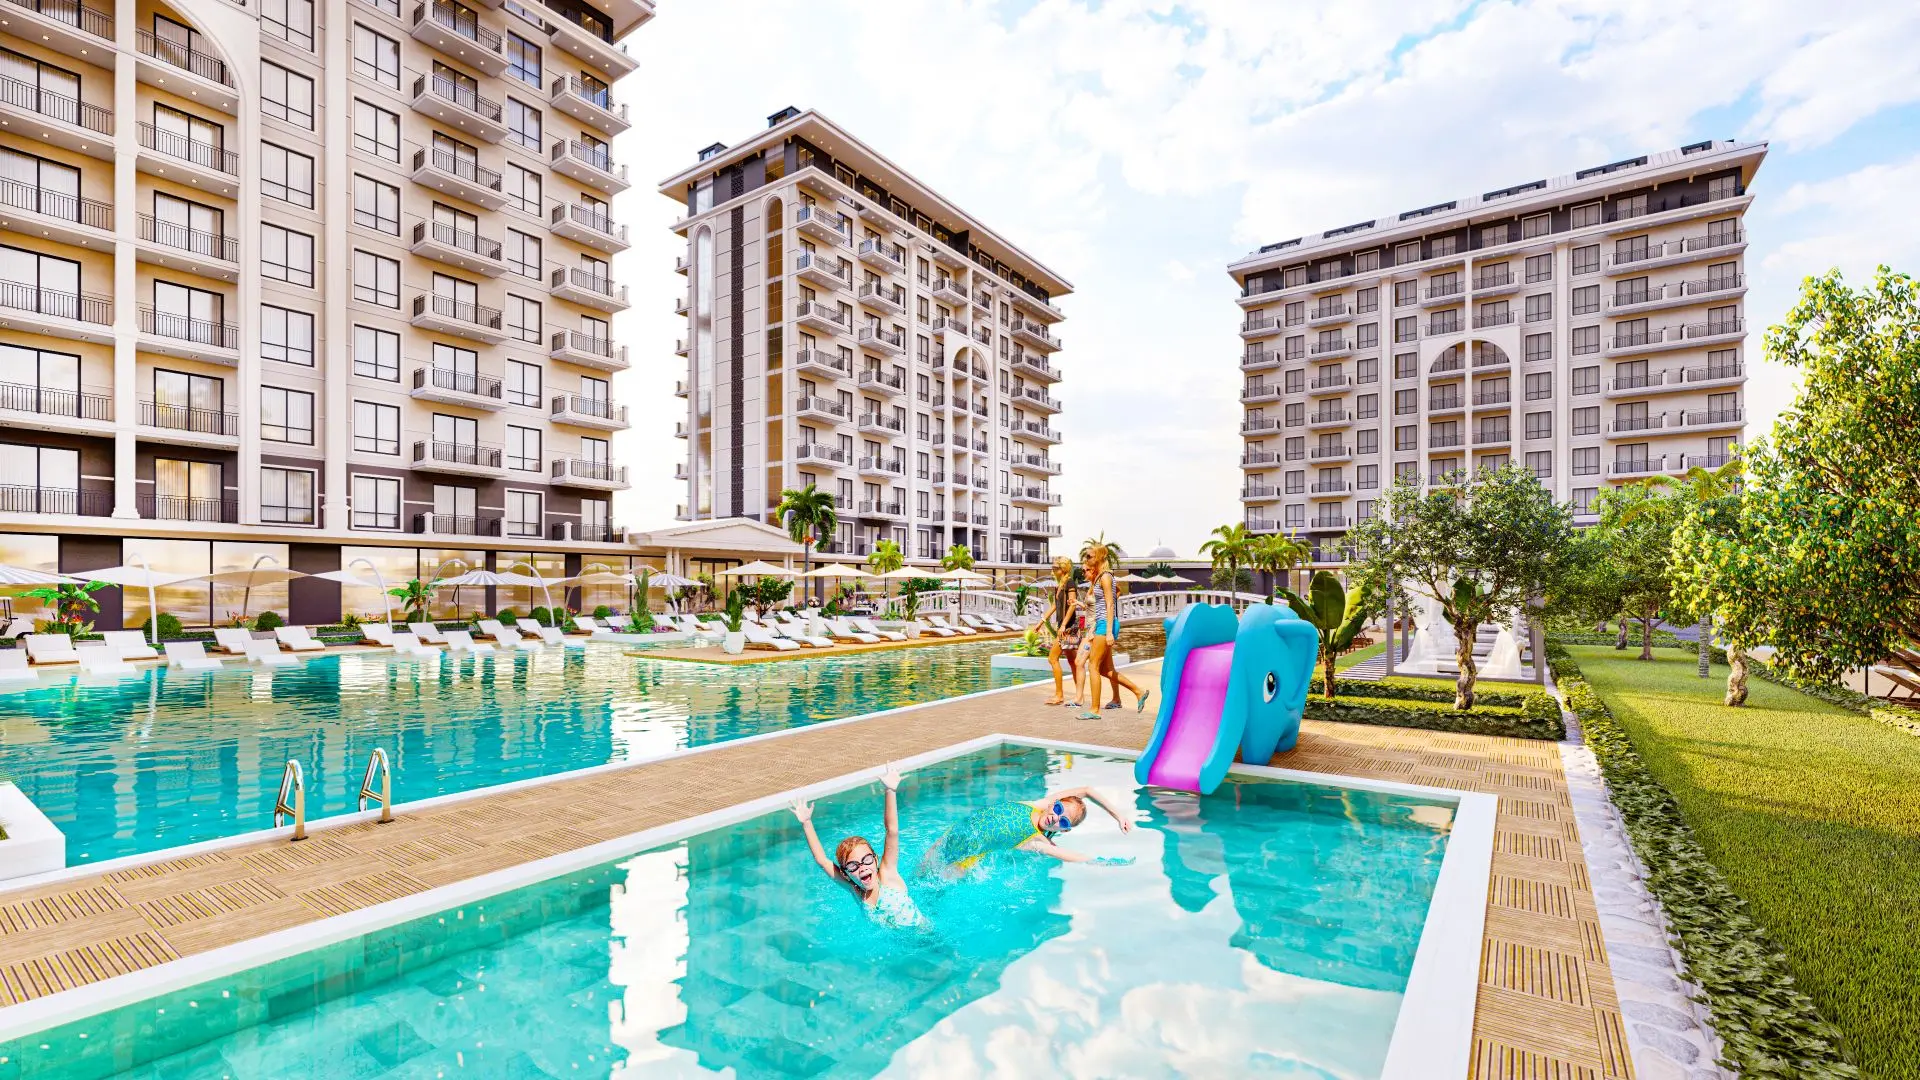 START OF SALES OF THE NEW GRAND PROJECT IN DEMIRTAS ALANYA